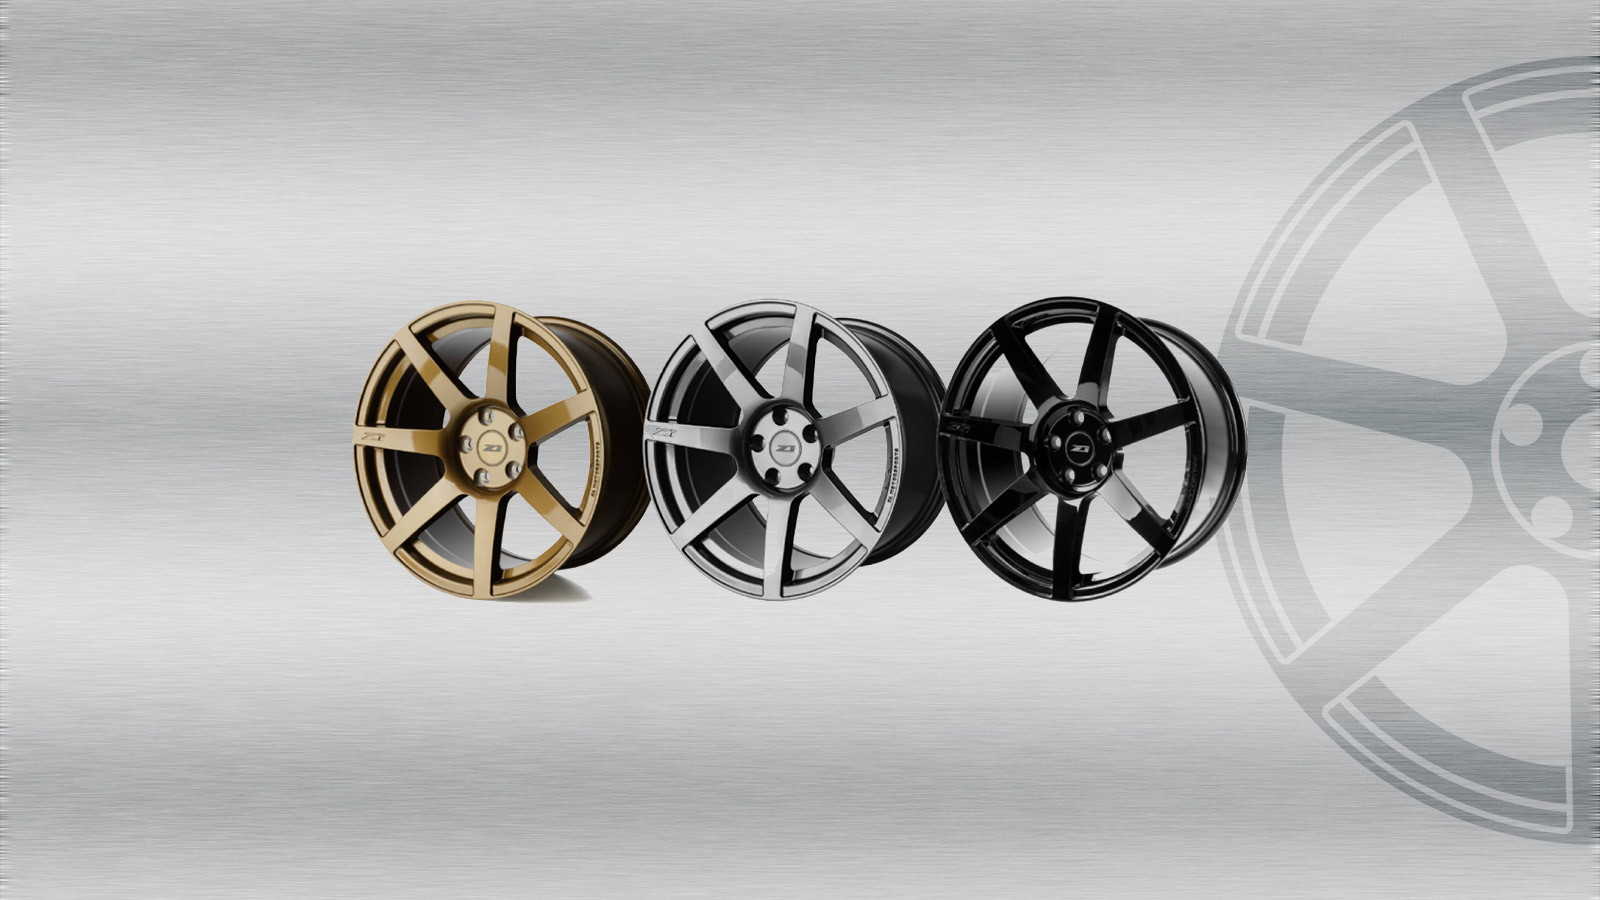 ZM-23 WHEELS The lightweight flow-formed G37 wheel designed for your ride